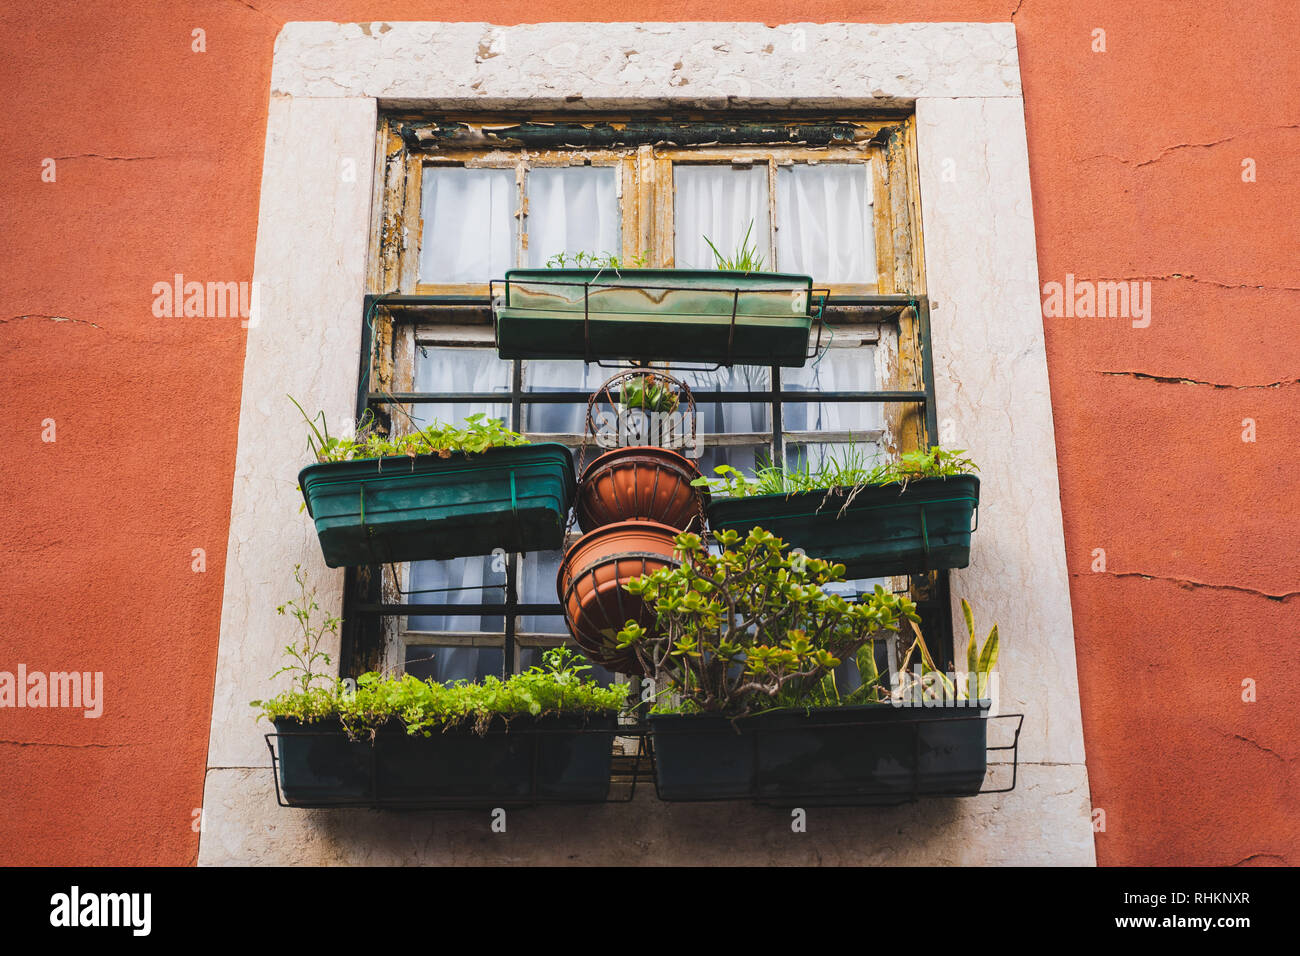 Window succulent boxes and plant boxes, pot plants. Old red building, white window frames, Rusty ancient window frame with beautiful plants. Stock Photo